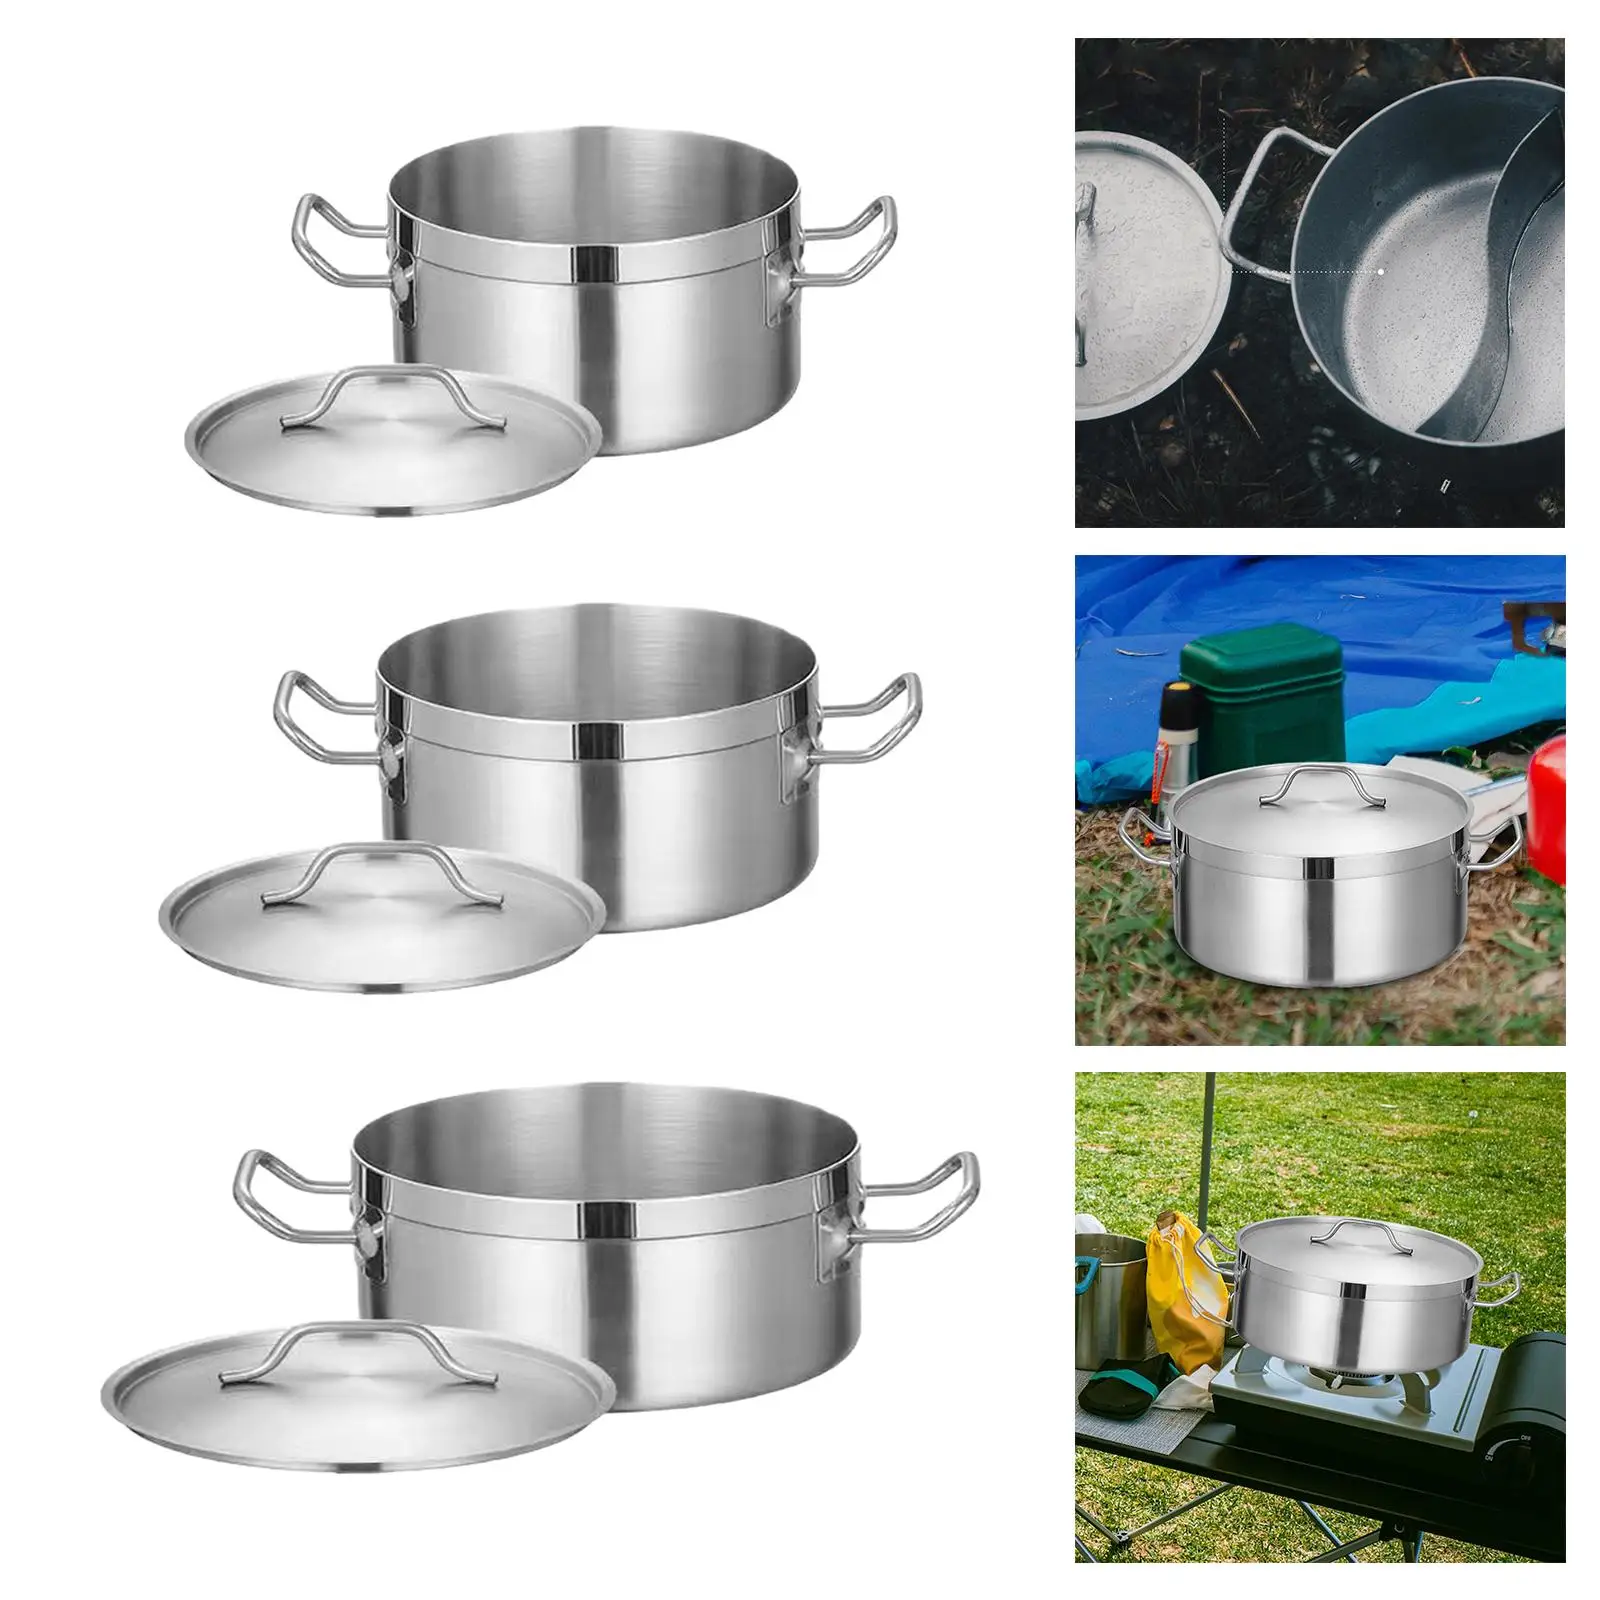 Stainless Steel Stockpot Cooking Pot with Lid Saucepan Small Cookware Induction Stockpot Soup Pot for Commercial Kitchen